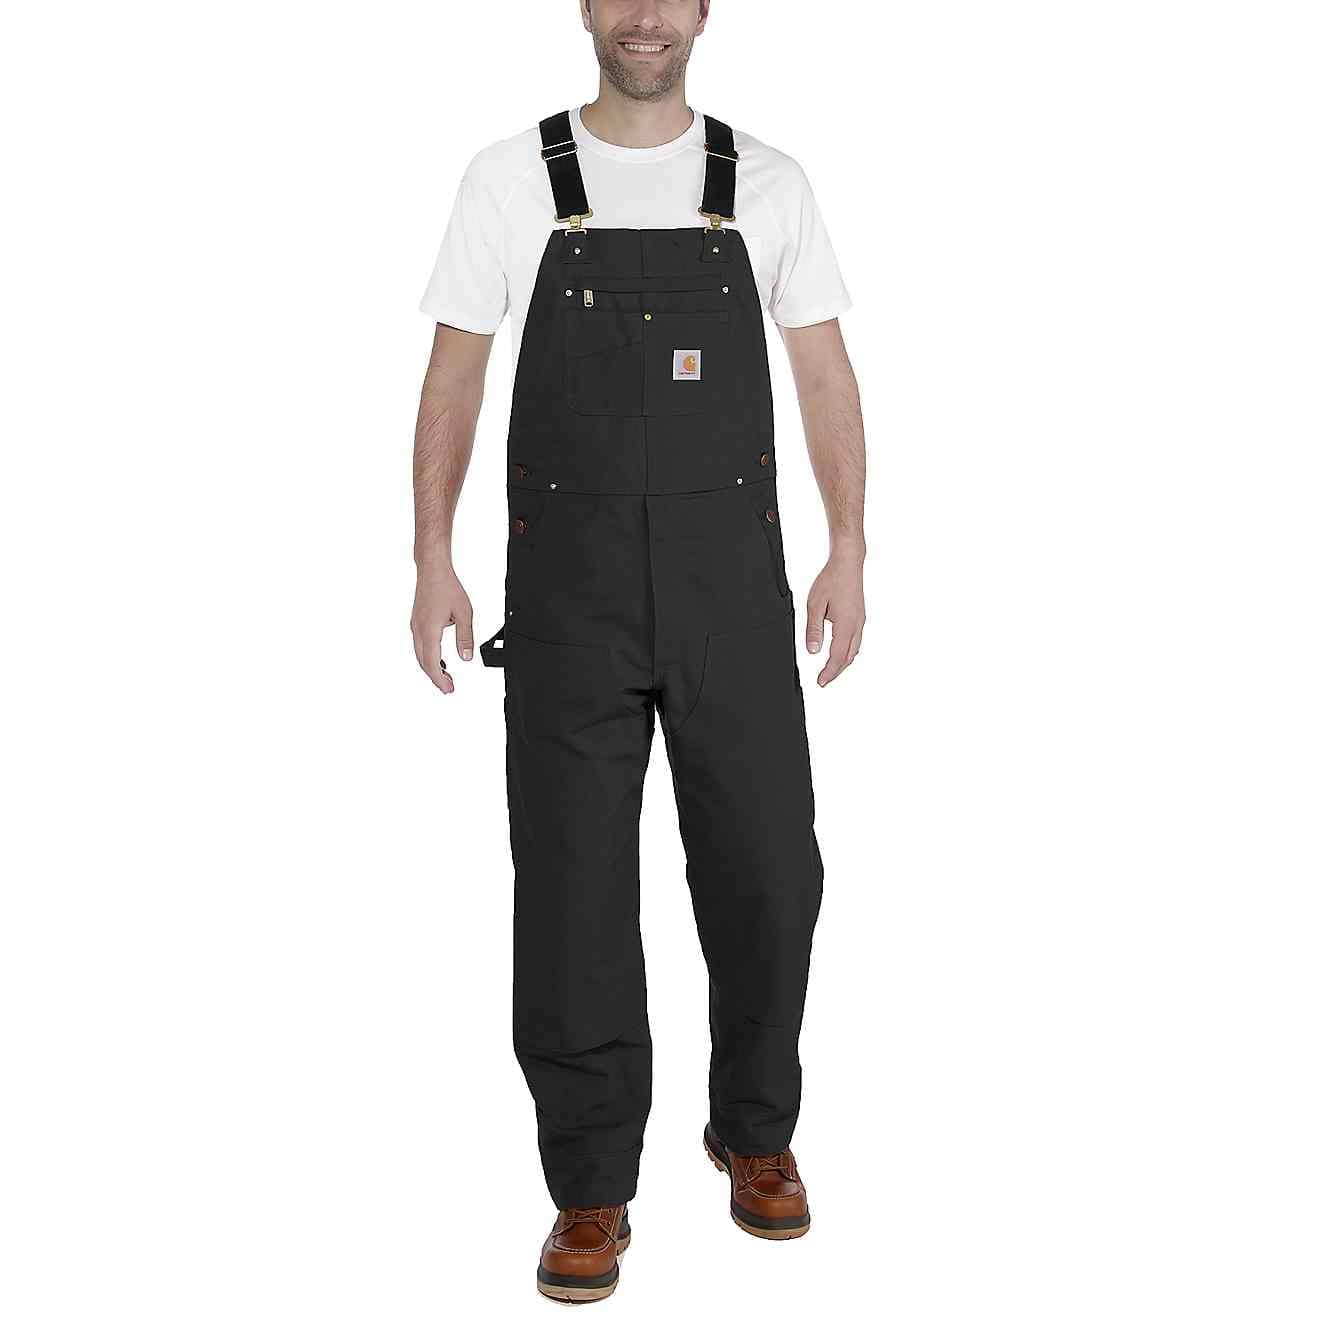 RELAXED FIT DUCK BIB OVERALL | Carhartt®